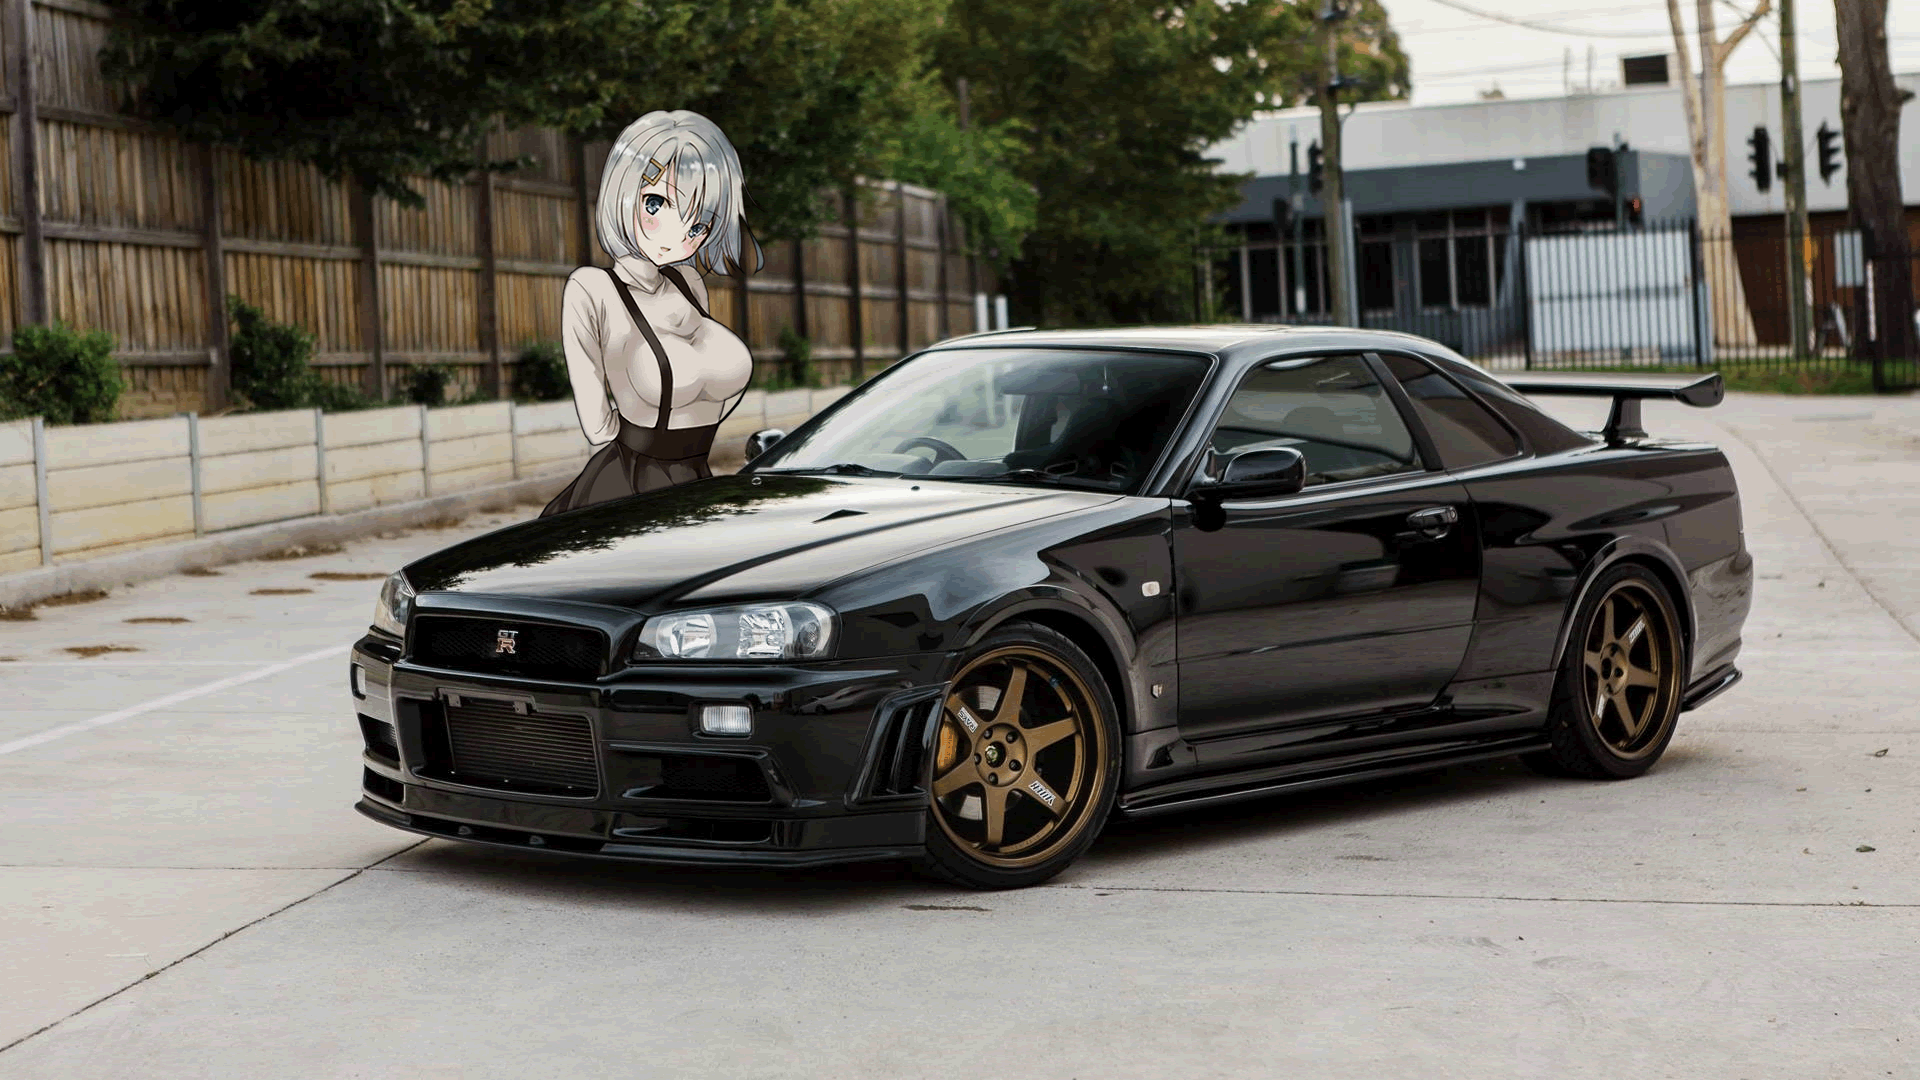 Anime 1920x1080 anime girls Japanese cars picture-in-picture car animeirl big boobs boobs